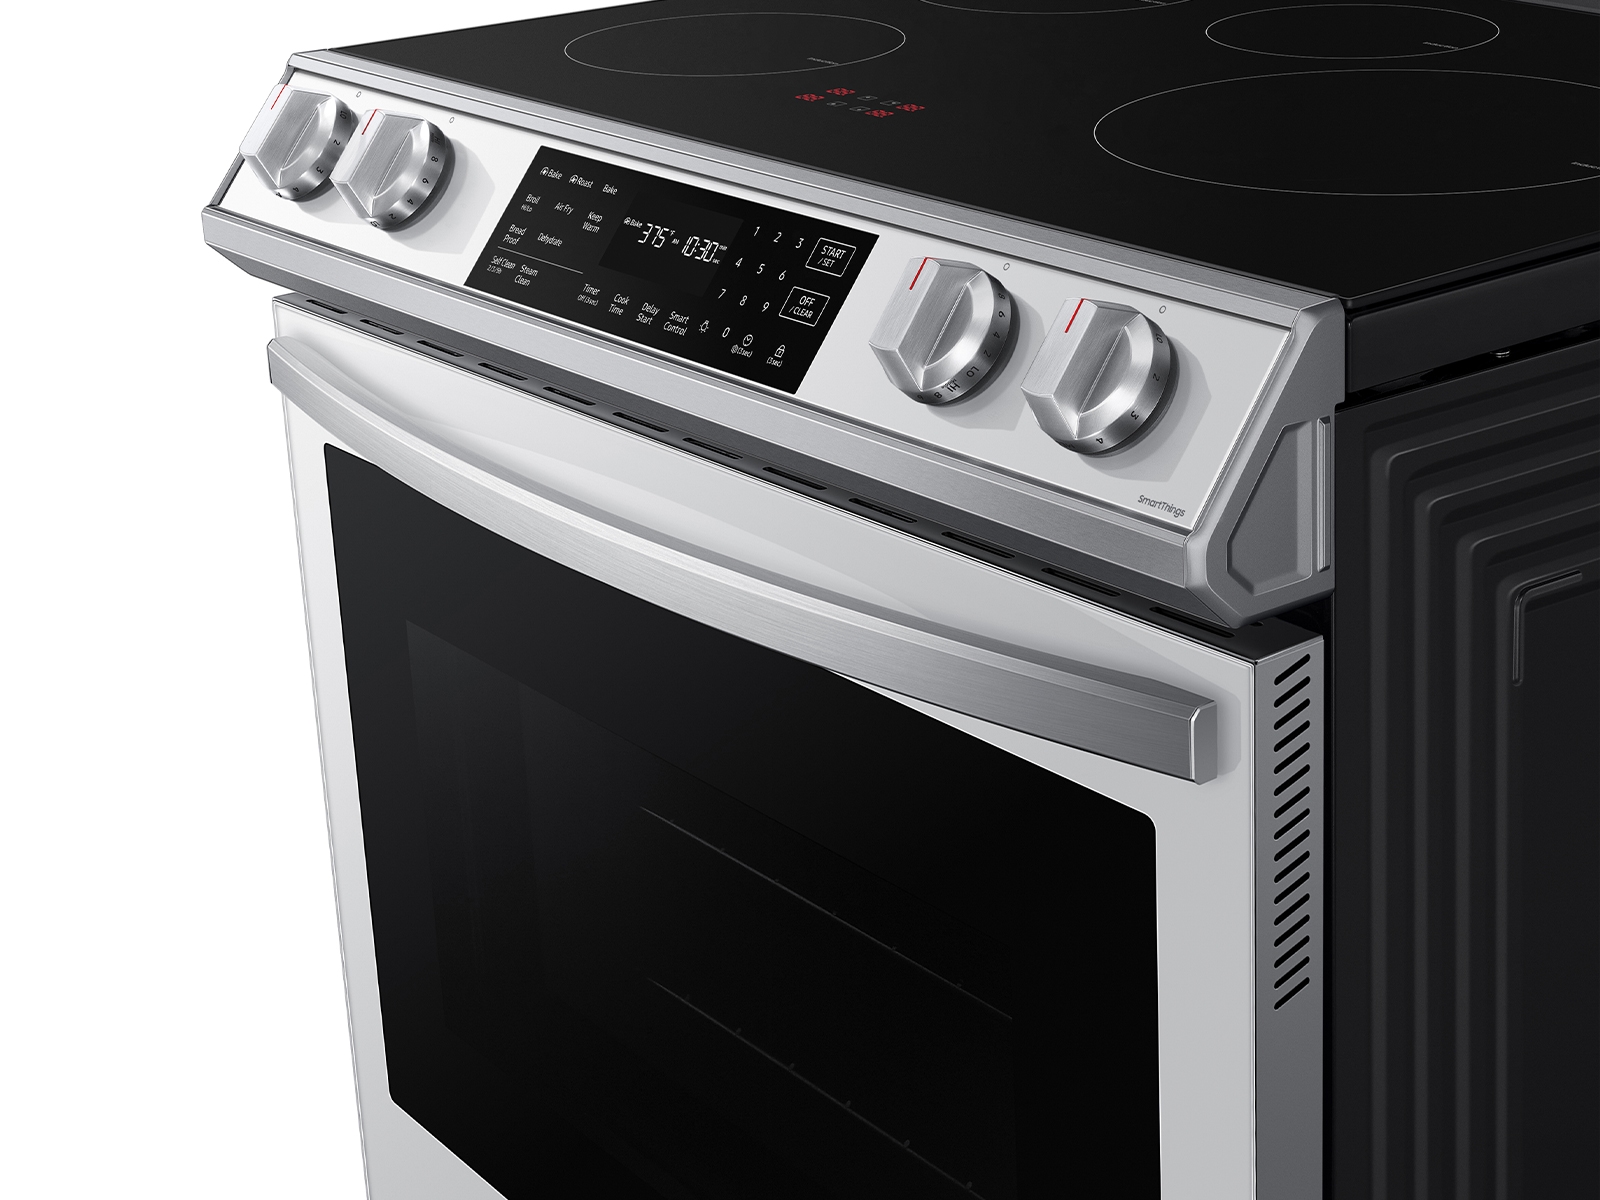 Samsung 30-inch Freestanding Induction Range with Air Fry and Convecti